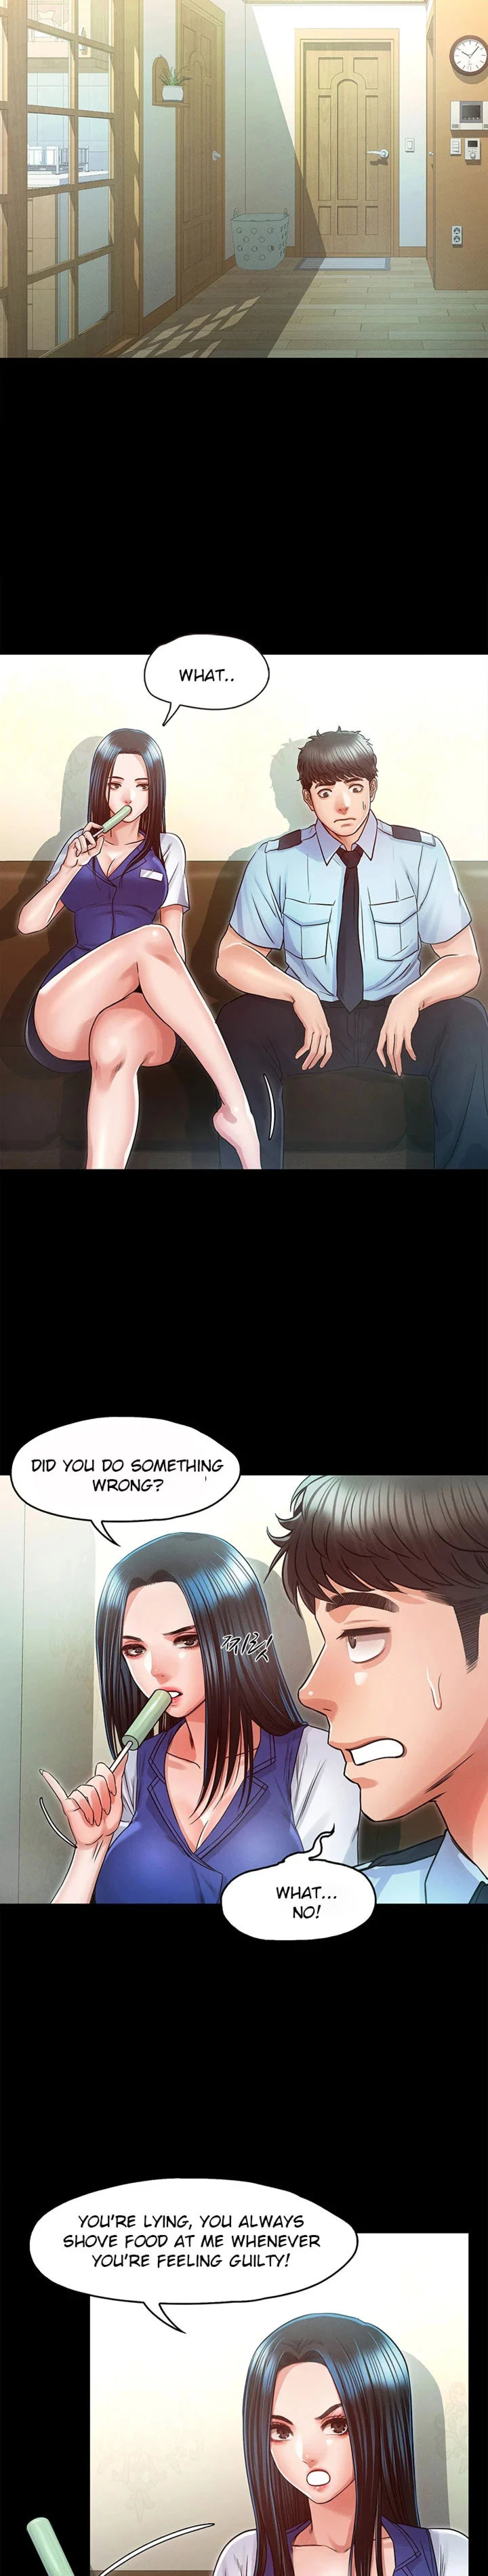 Who Did You Do With? - Chapter 29 Page 6